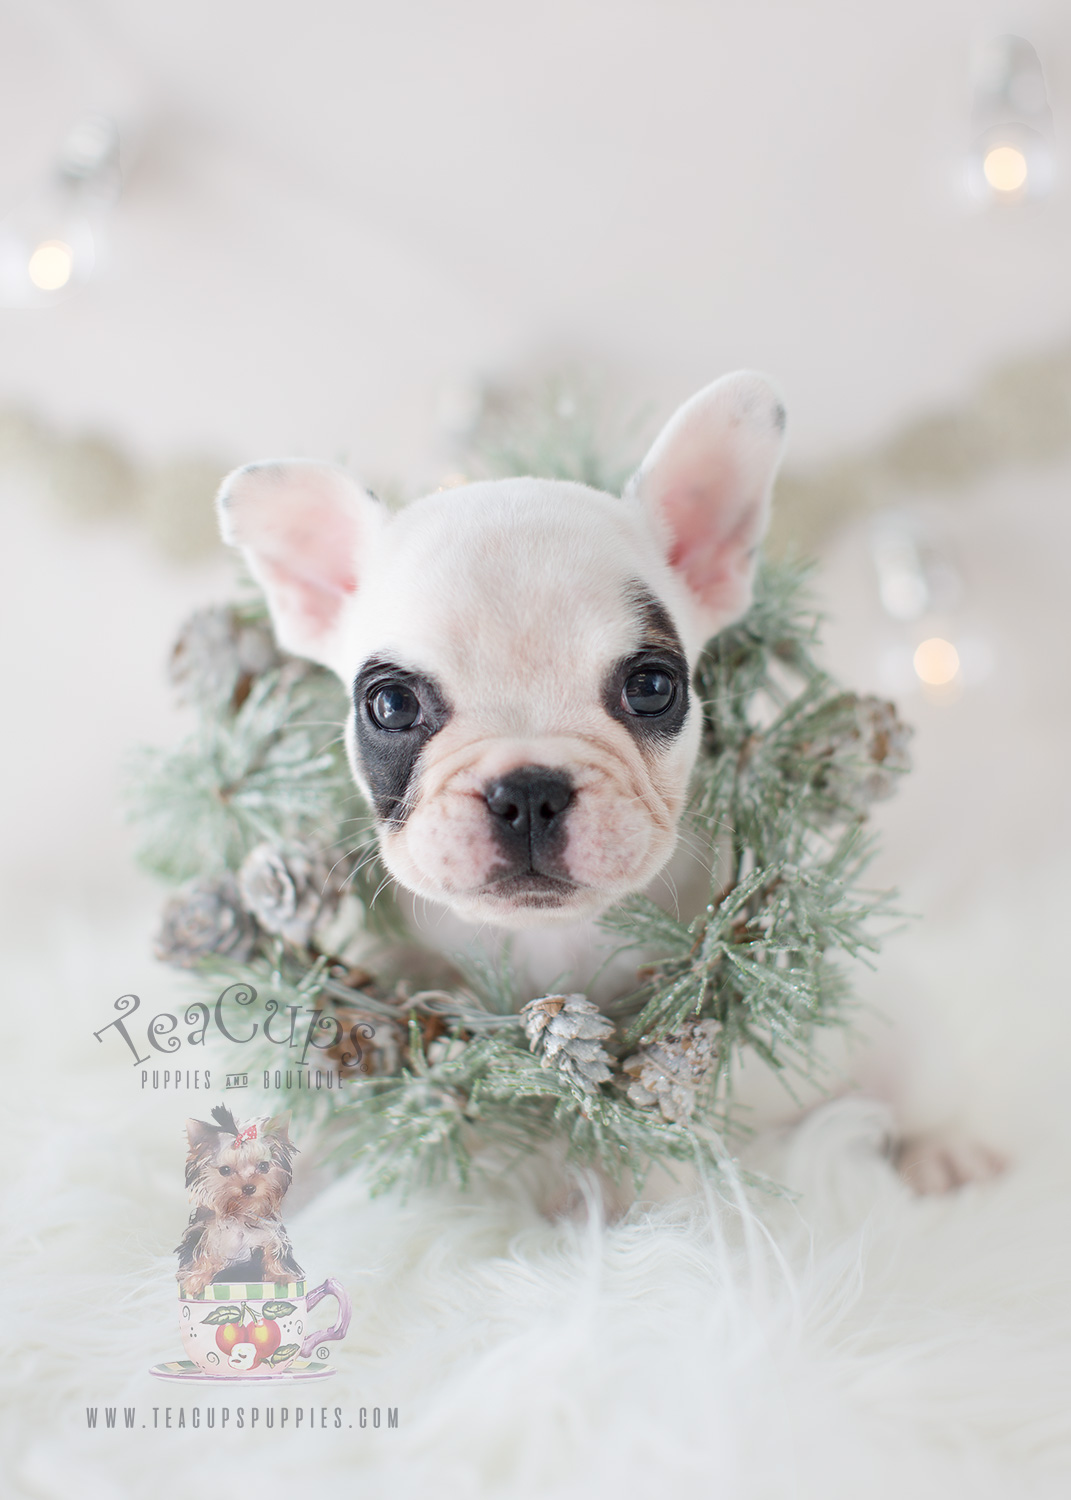 The Frenchie of your dreams is here! Teacup Puppies